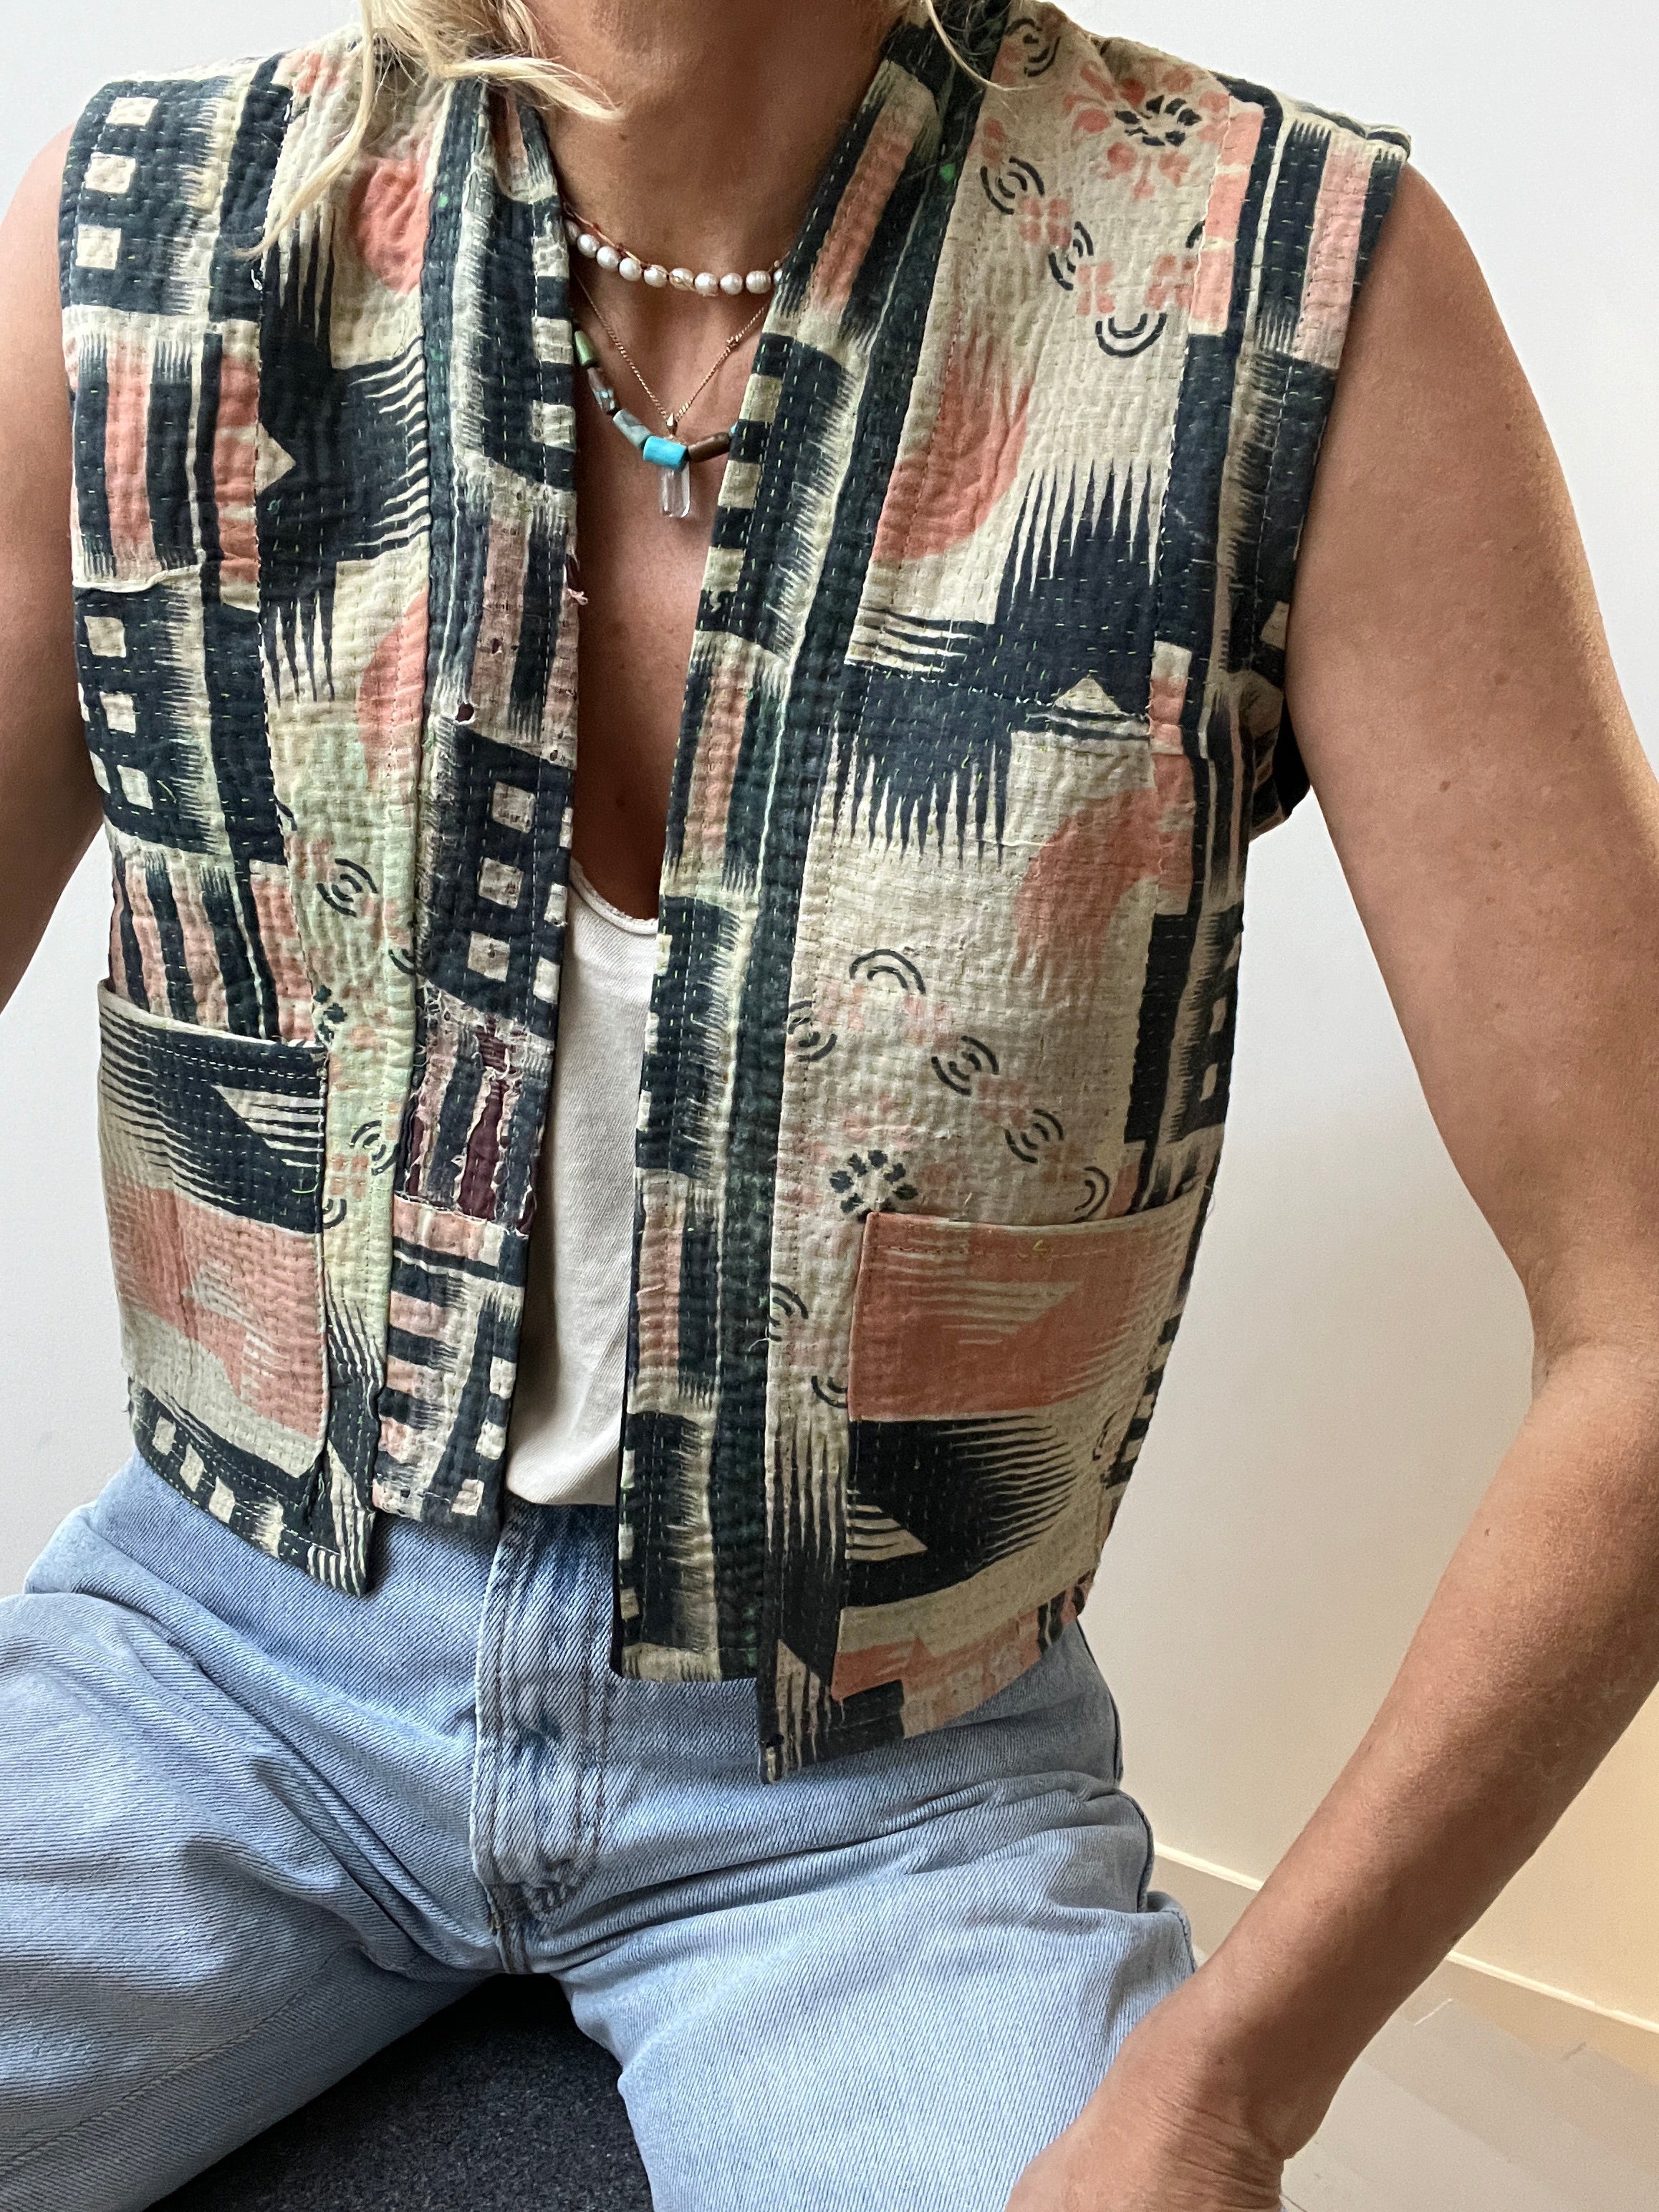 Not specified Vests Small-Medium Reversable Vintage Vest Navy and Peach